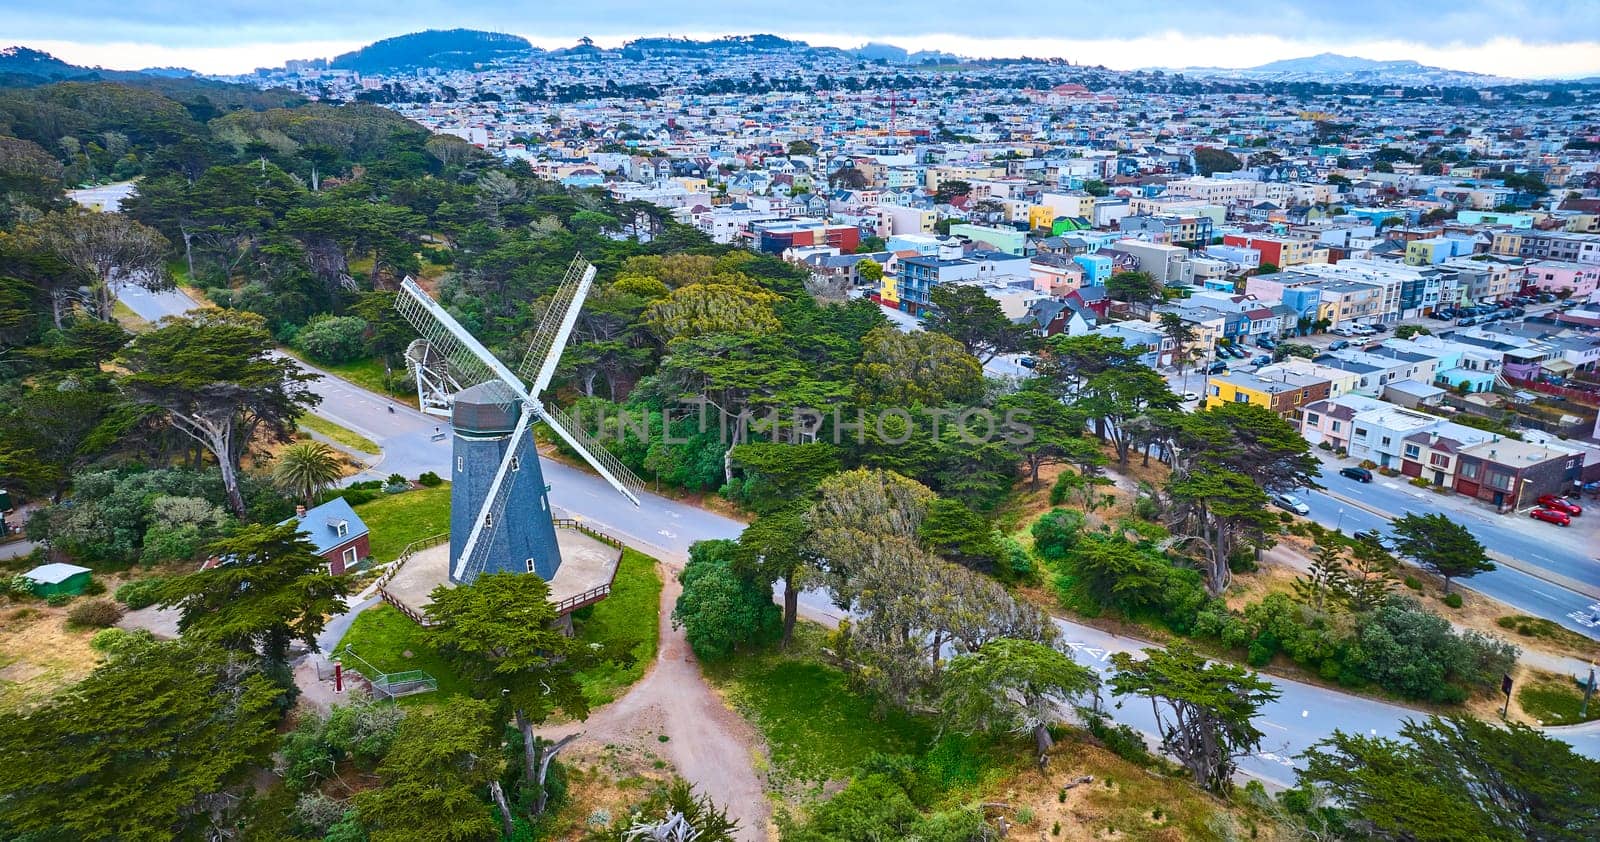 Image of Aerial San Francisco murphy windmill overlooking colorful urban city homes